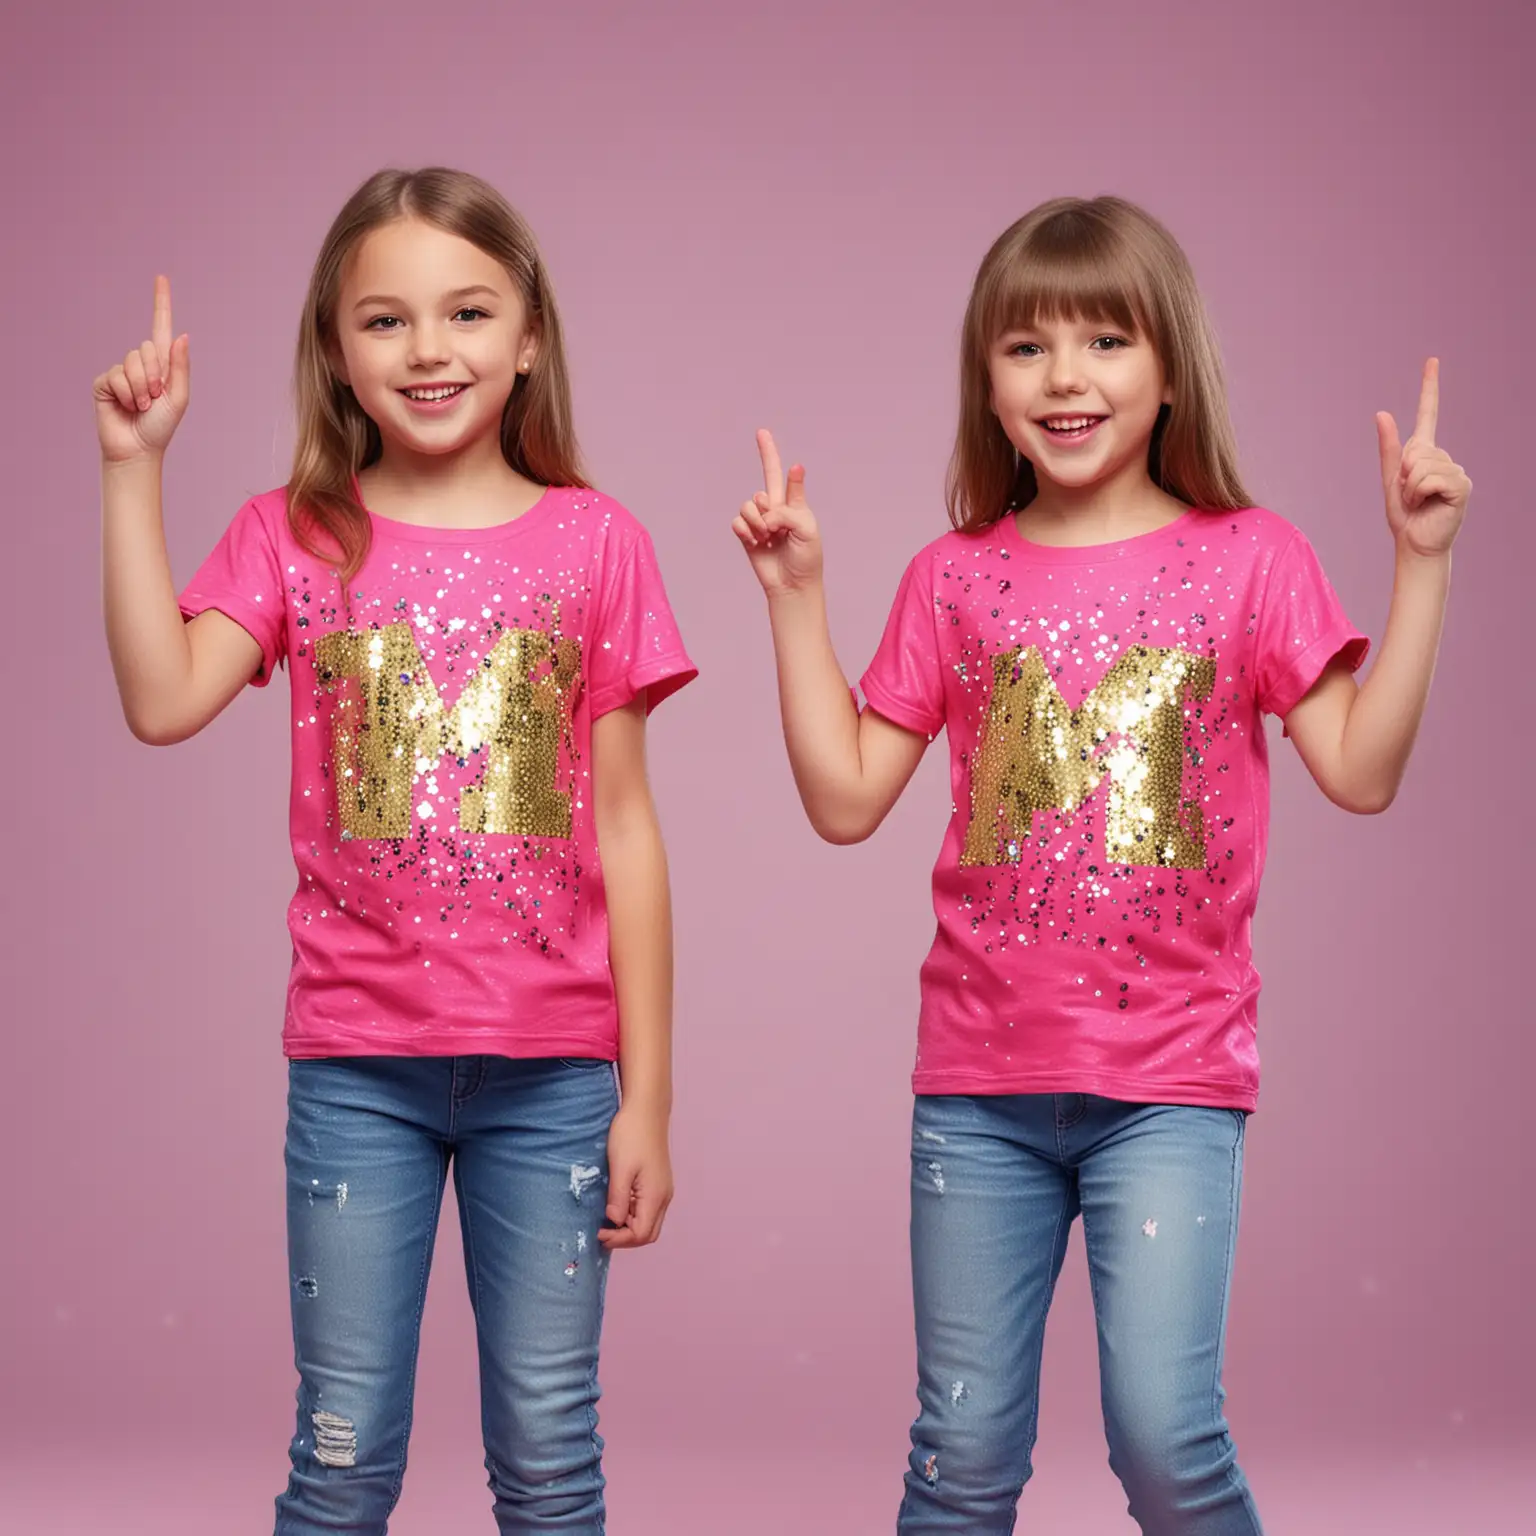 Young Girls Dancing to Taylor Swift in Sequined Shirts